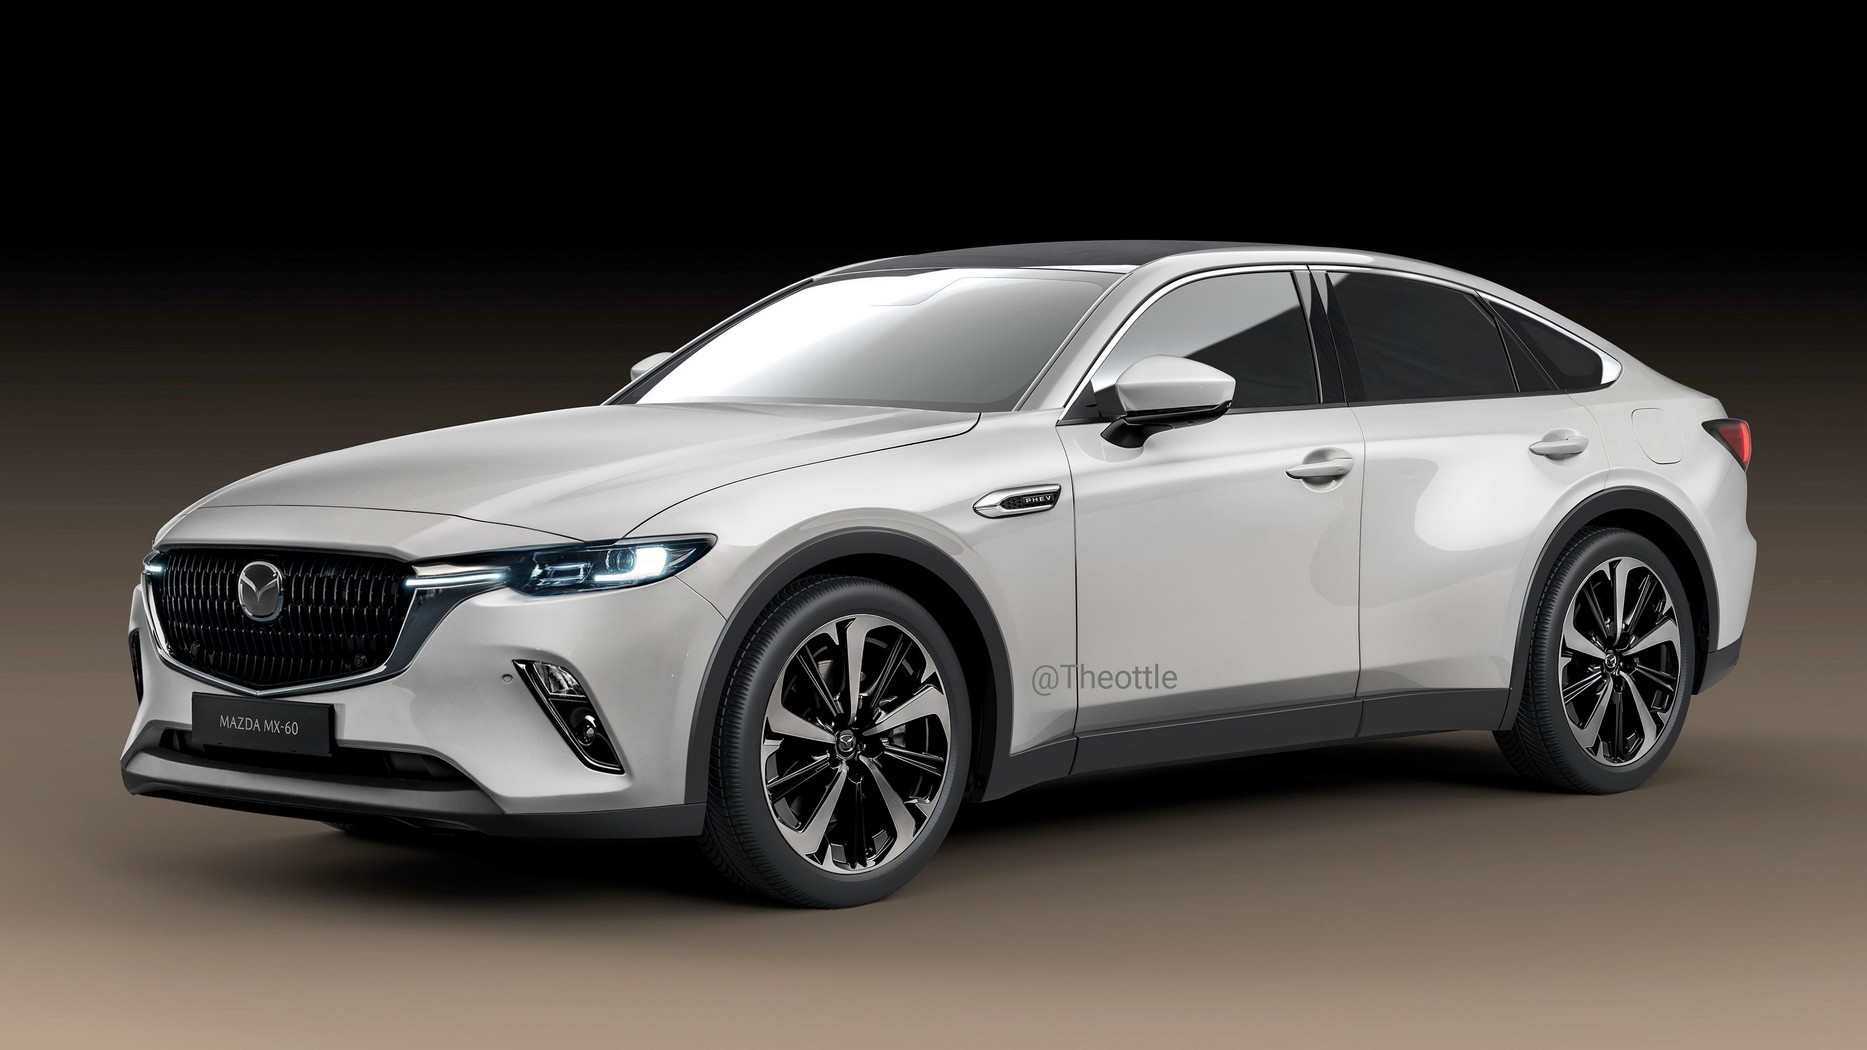 Mazda extends MX name to new MX-30 electric crossover